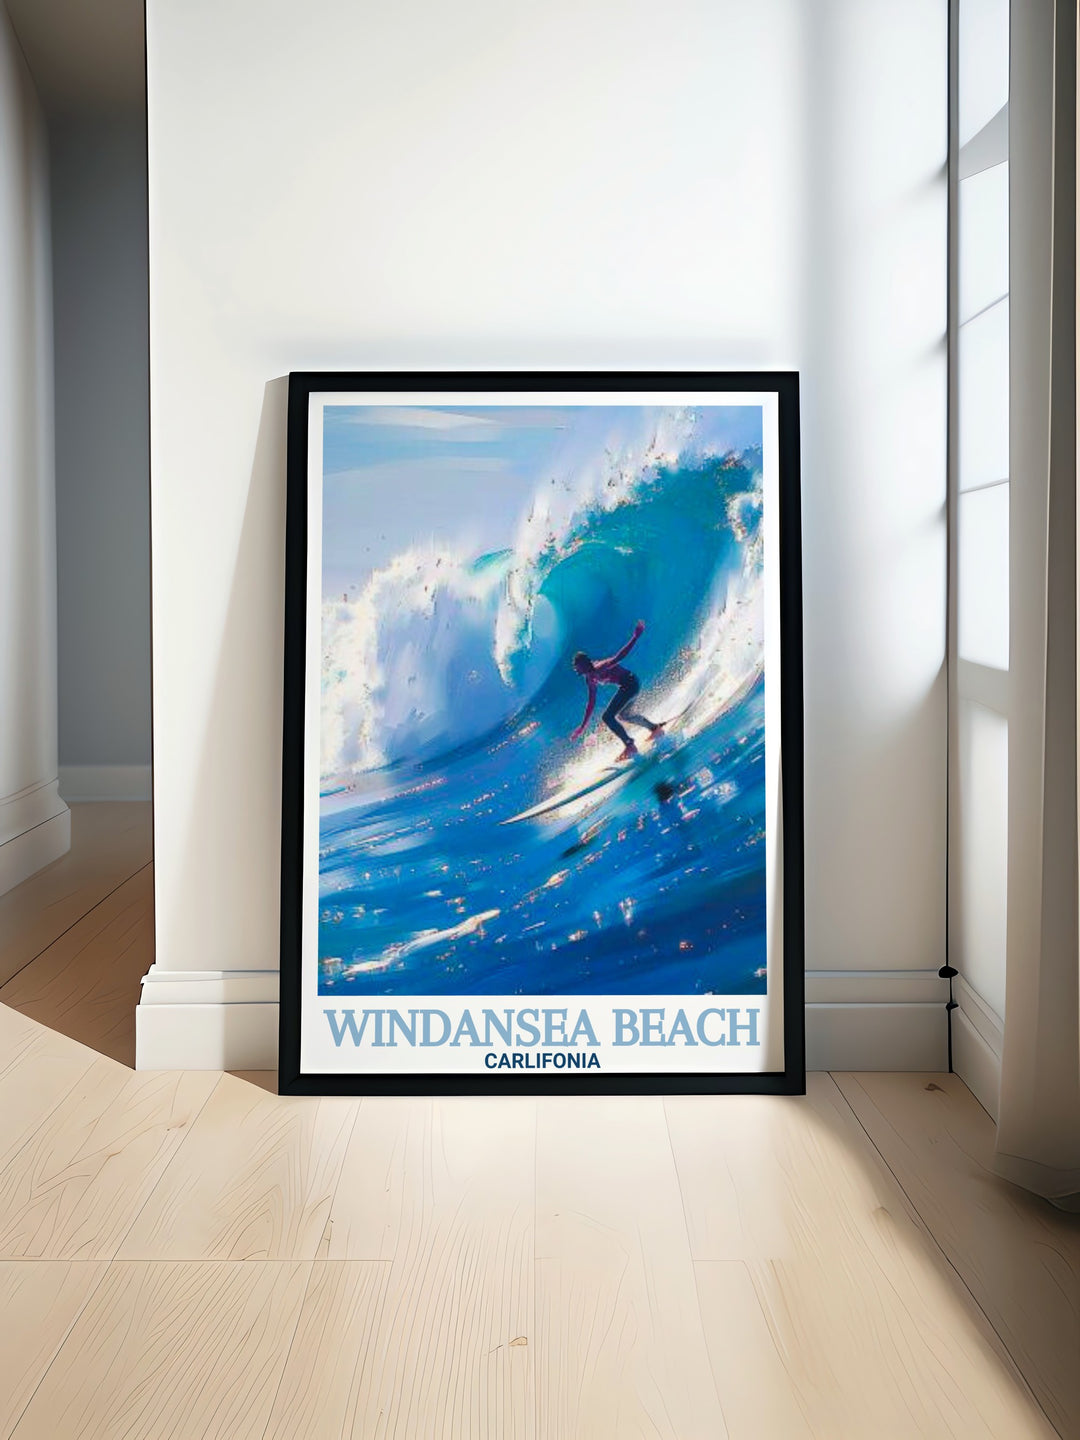 San Diego Poster featuring beautiful rock formations and Surfing Waves at Windansea Beach perfect for beach lovers and art enthusiasts. This vintage California poster is ideal for wall art and makes a great personalized gift for any occasion.